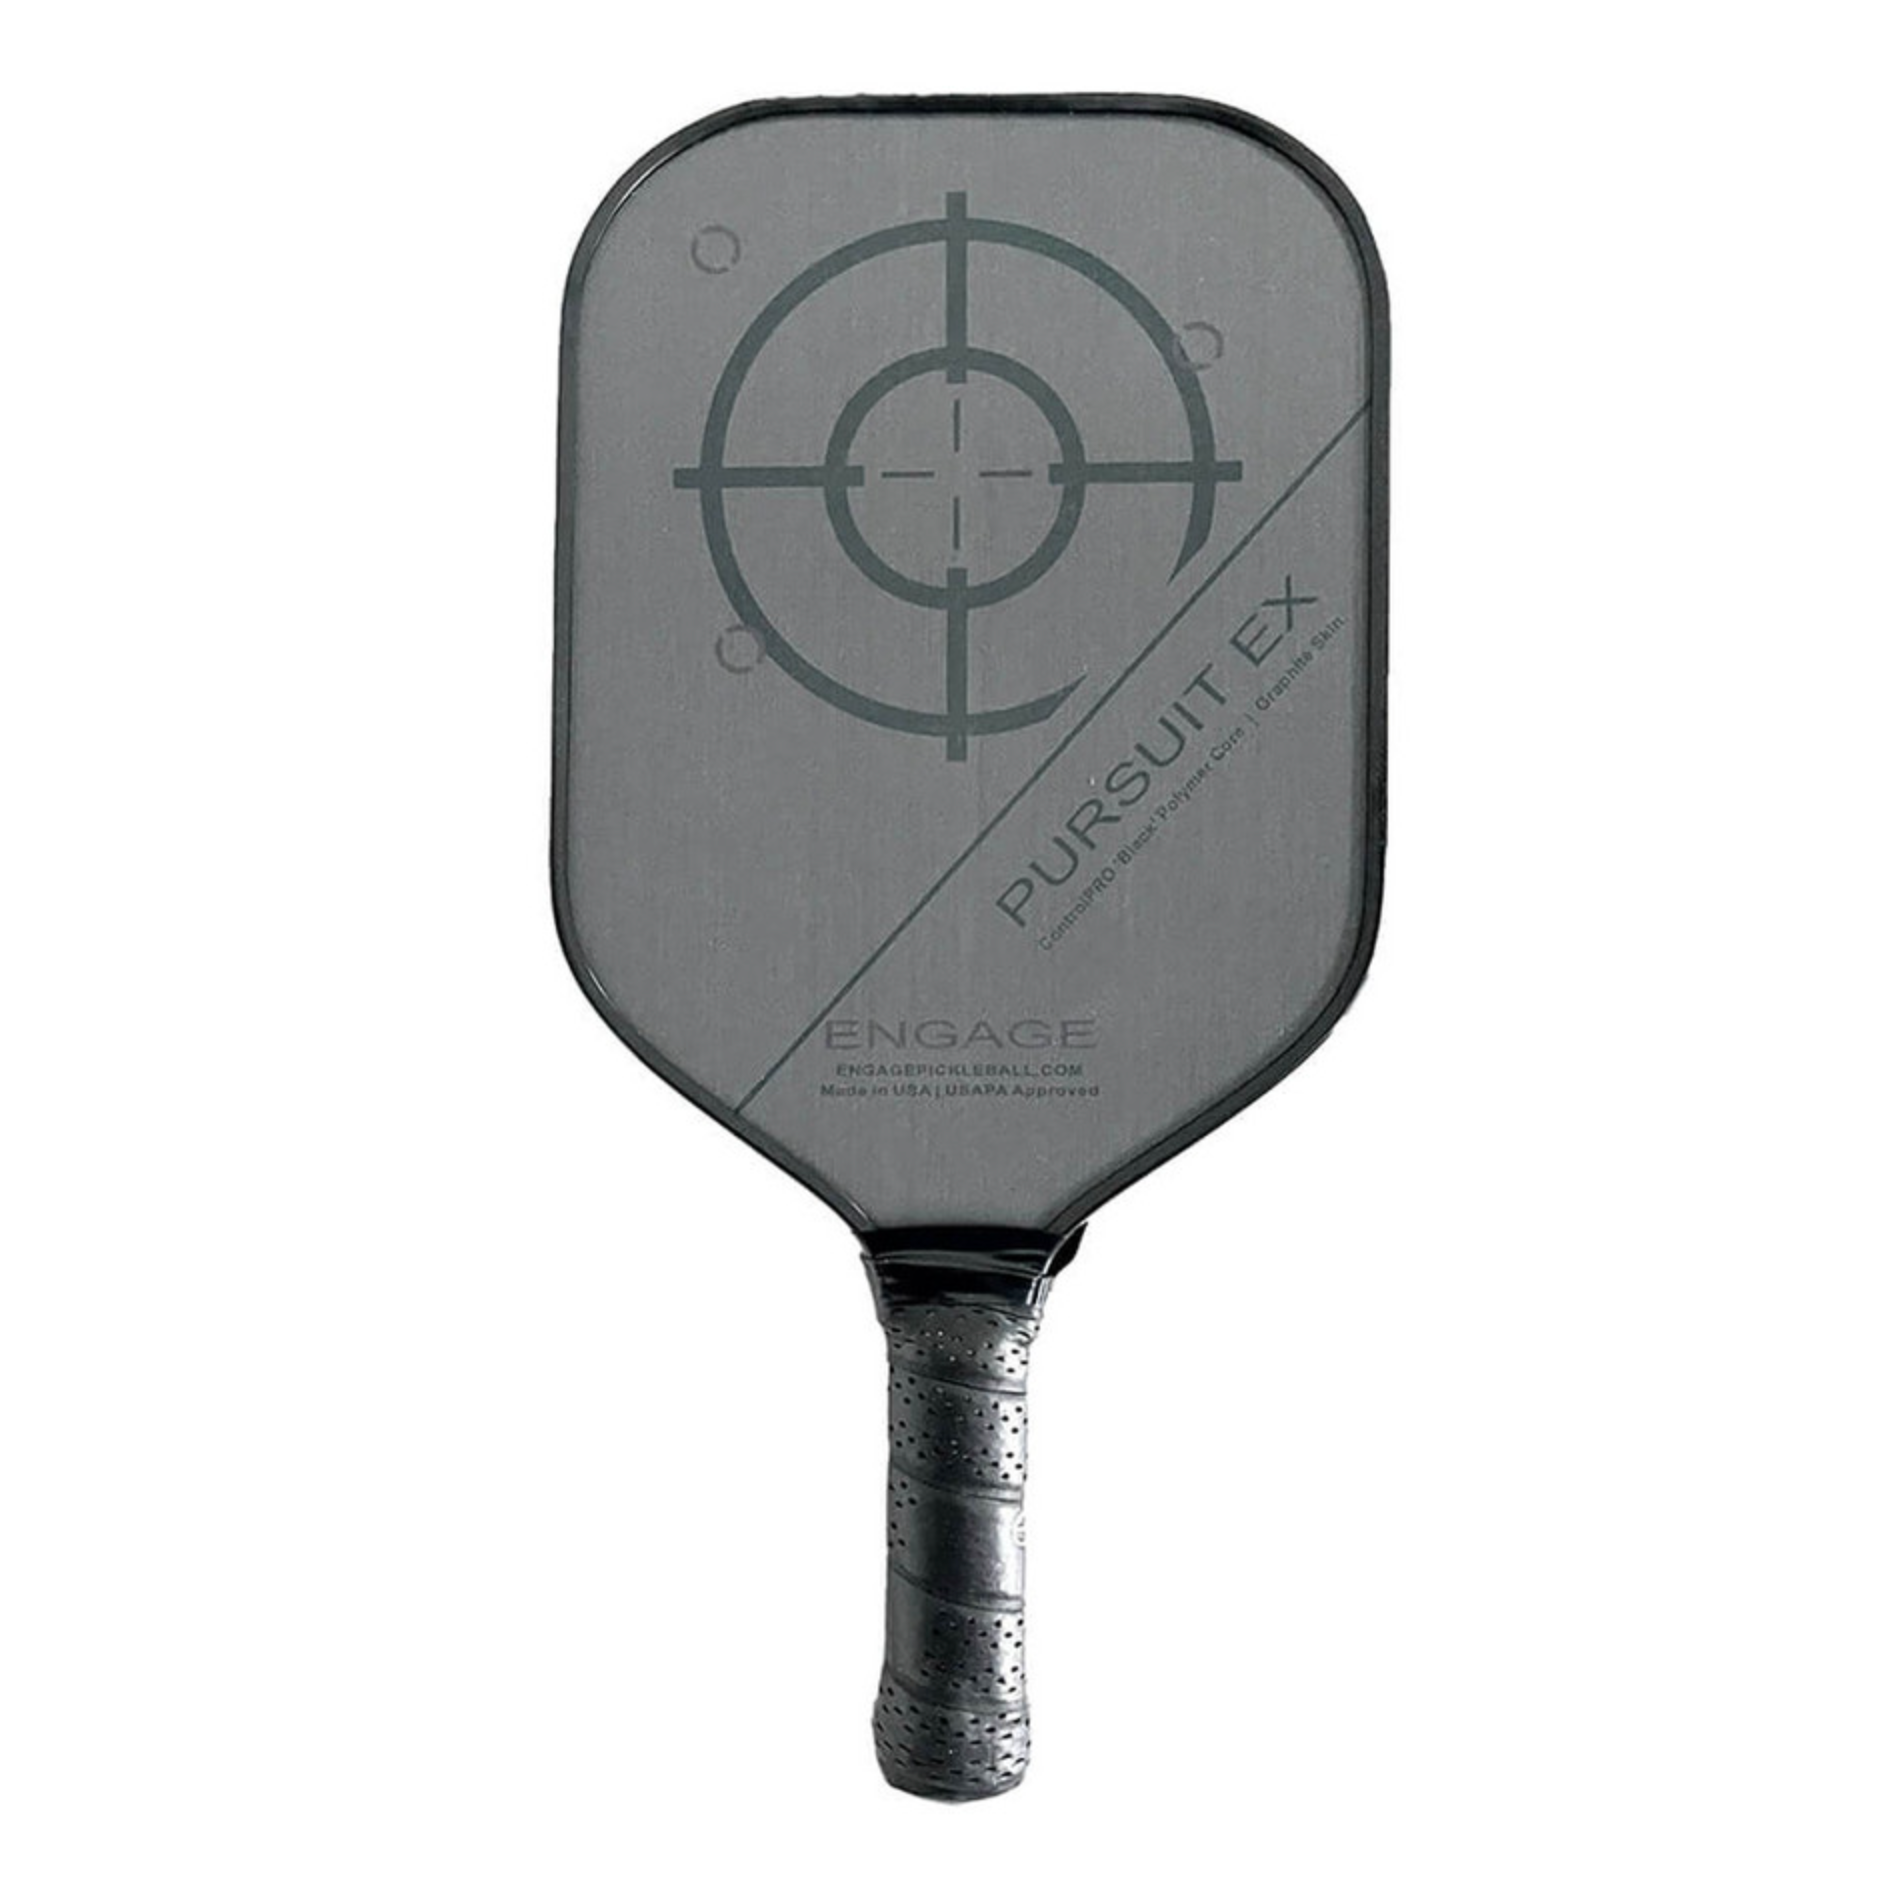 Made out of graphite, the Pursuit EX is a great lightweight pickleball paddle for a beginner. Photo Credit: Pickleball Central